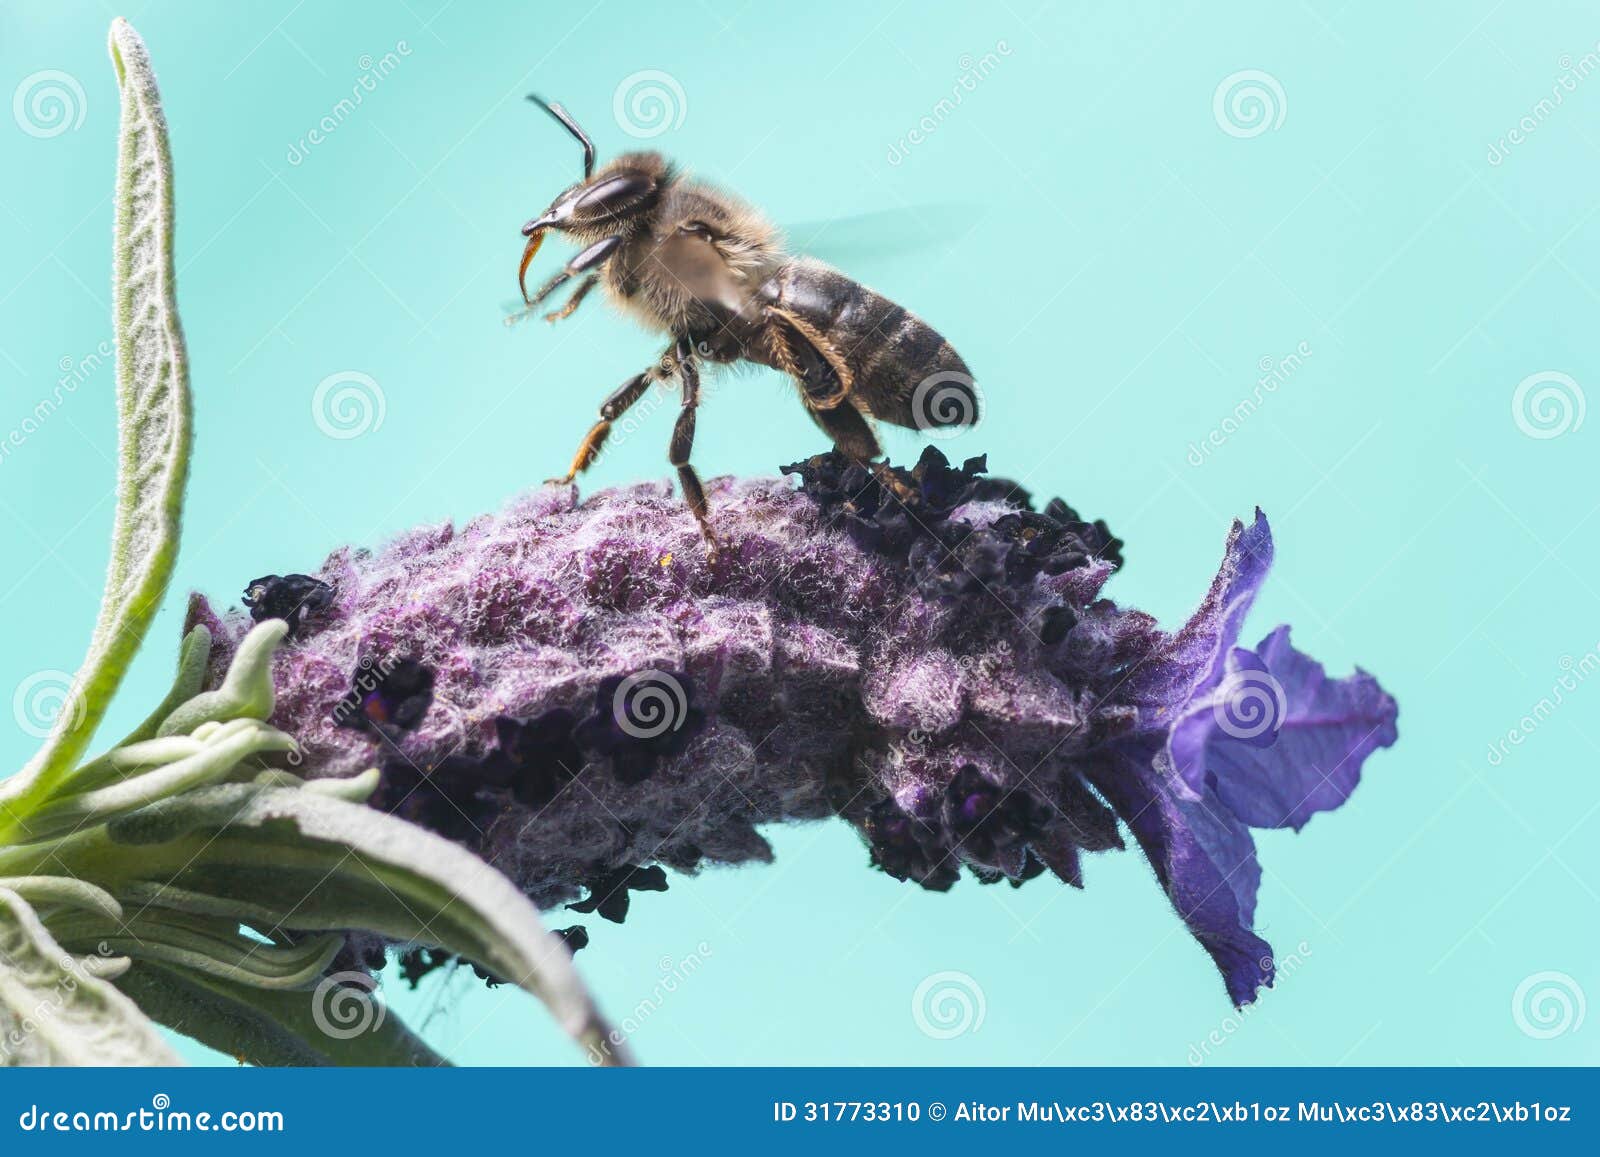 bee taking off from a flower